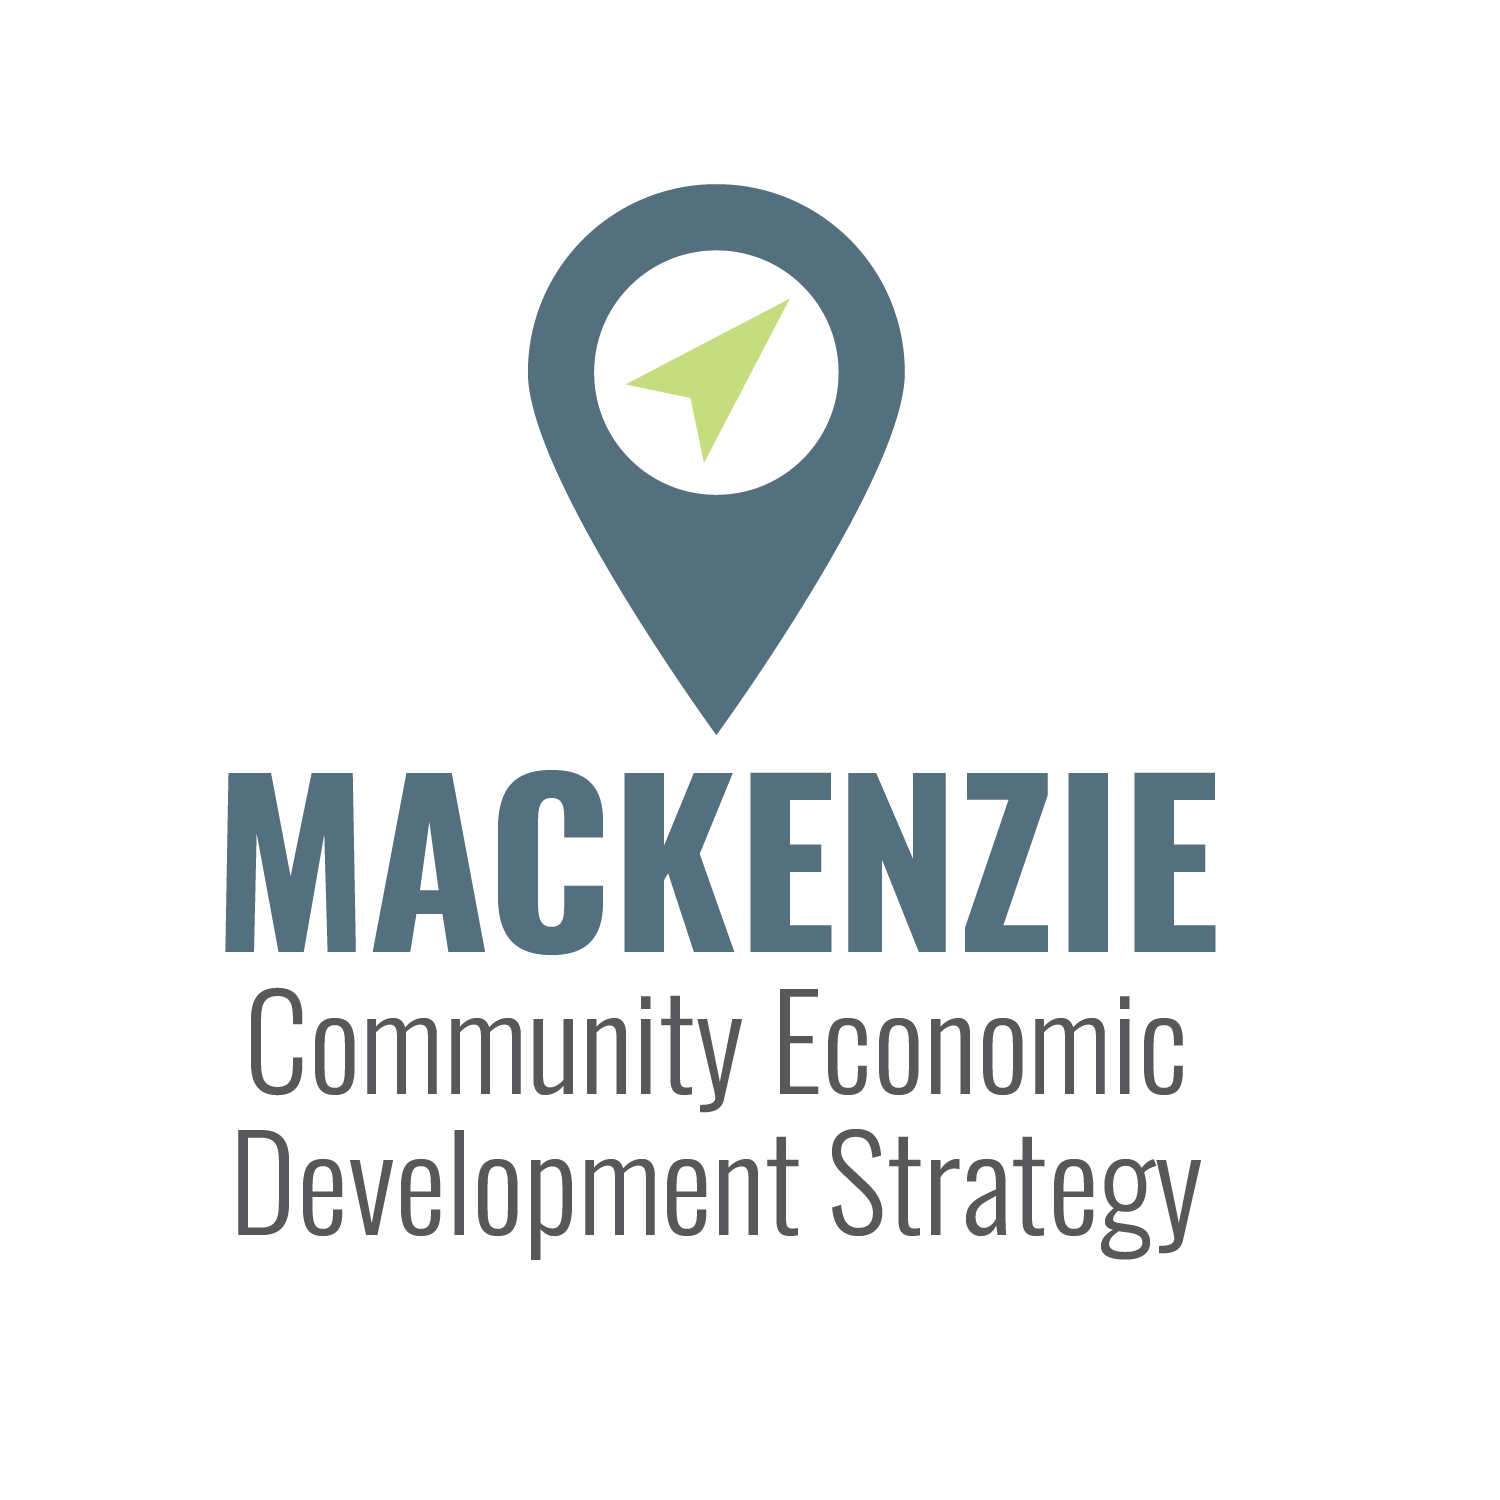 What are the most important ideas for how we can improve our local economy in Mackenzie?